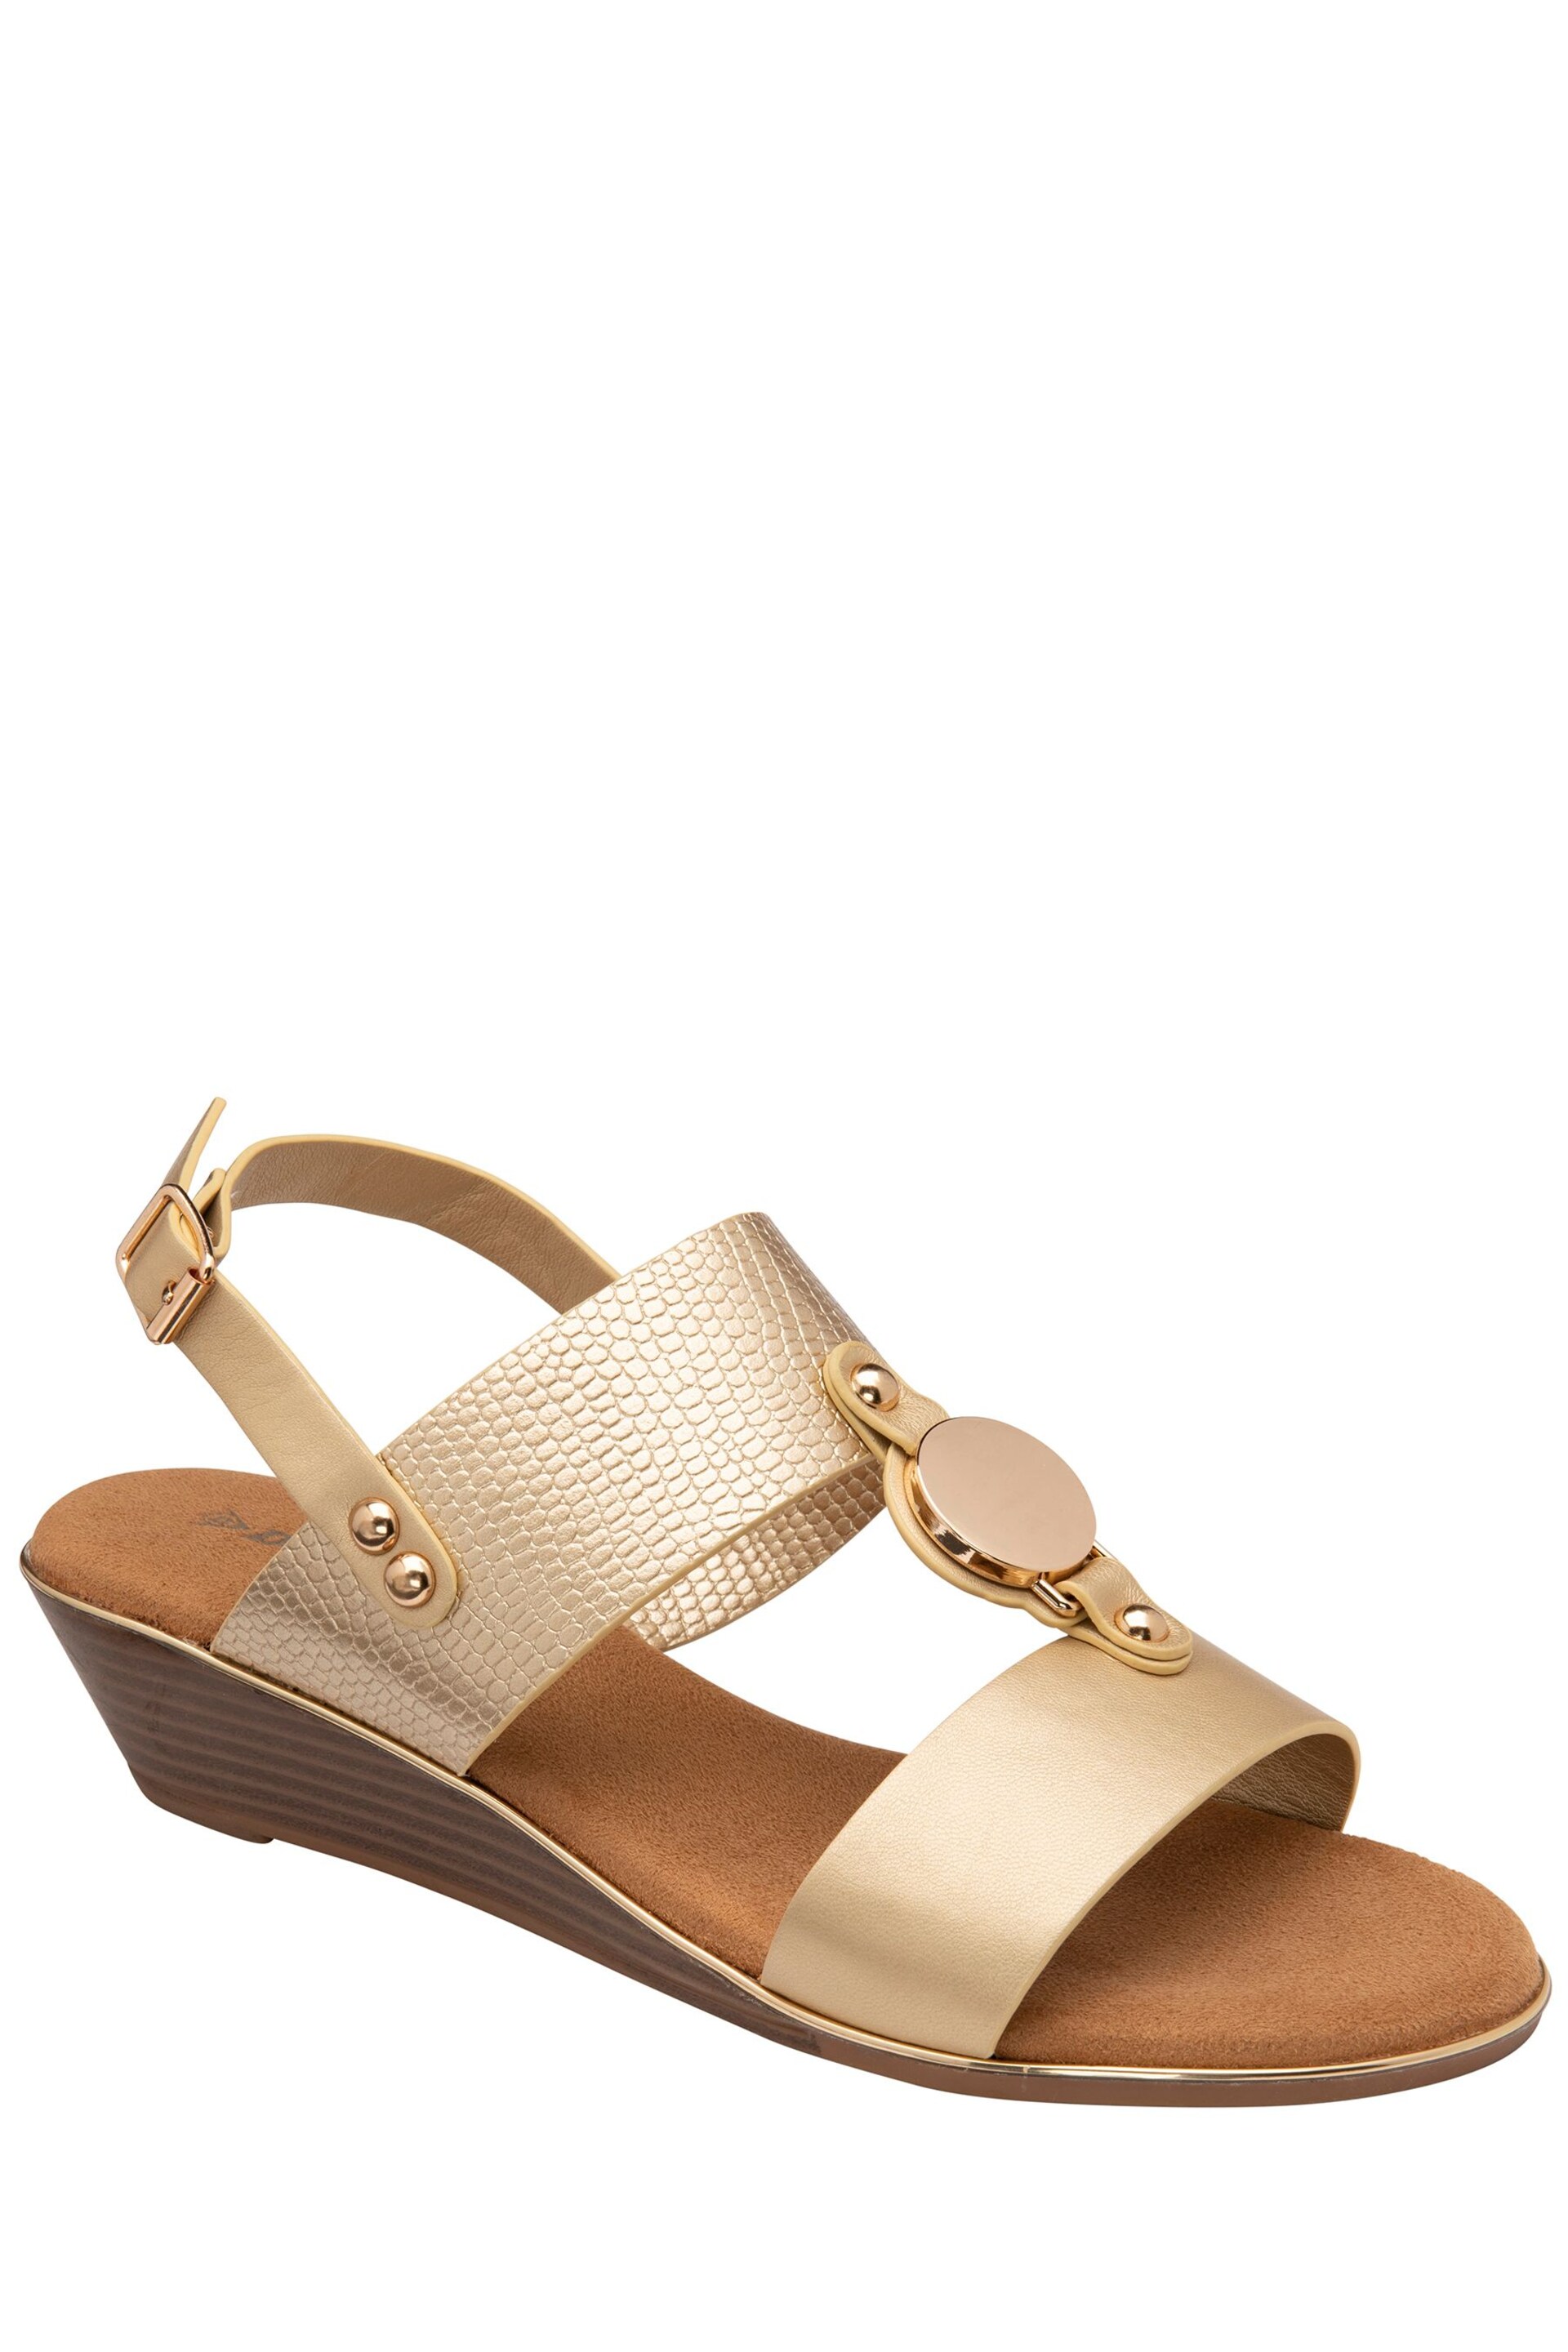 Dunlop Gold Wedge Open-Toe Sandals - Image 1 of 4